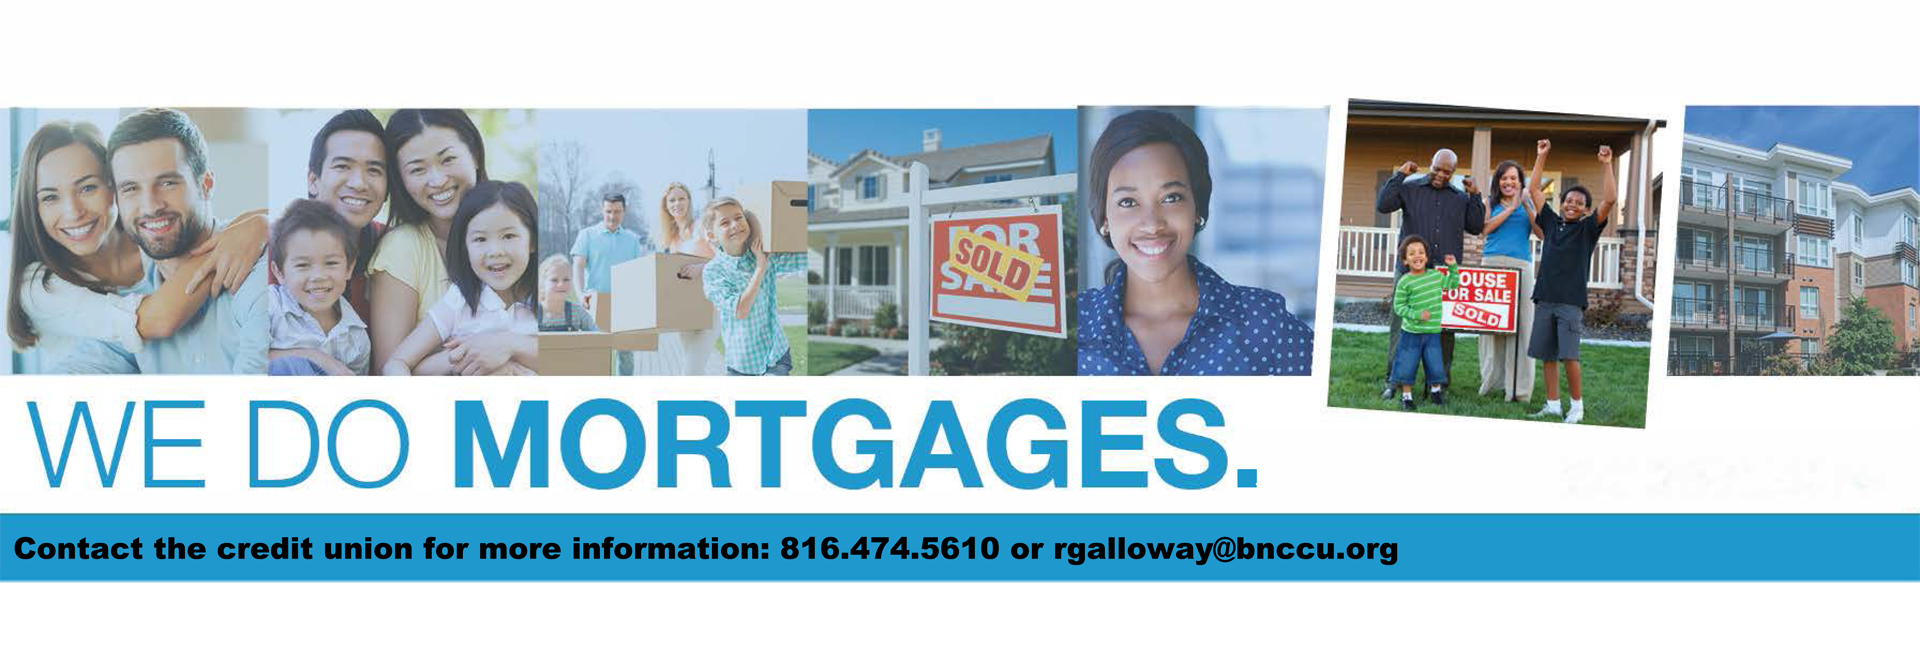 We do mortgages